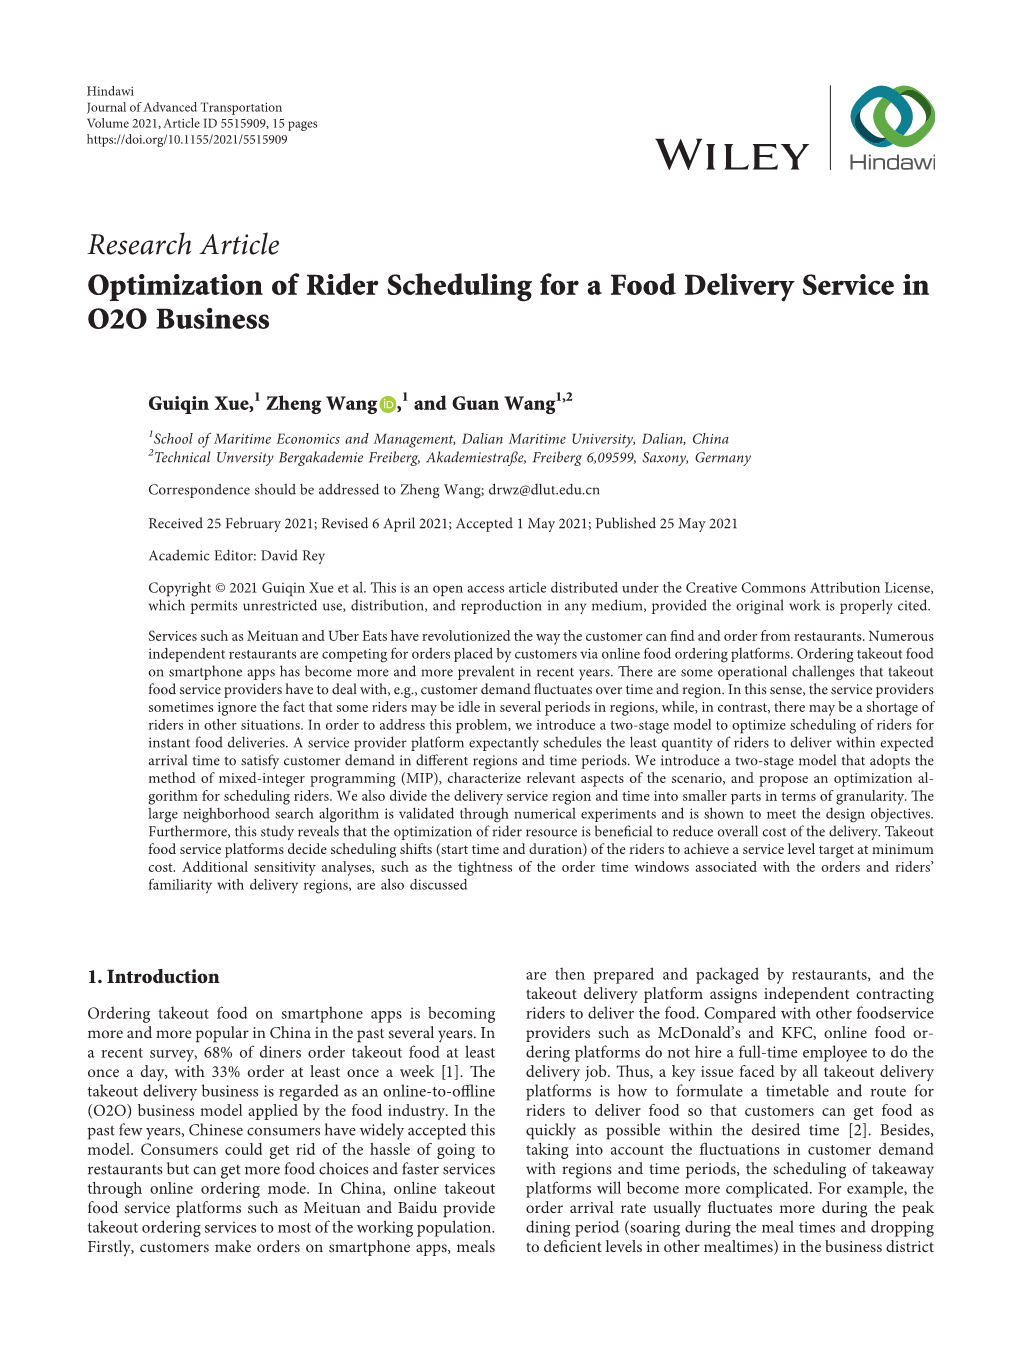 Optimization of Rider Scheduling for a Food Delivery Service in O2O Business